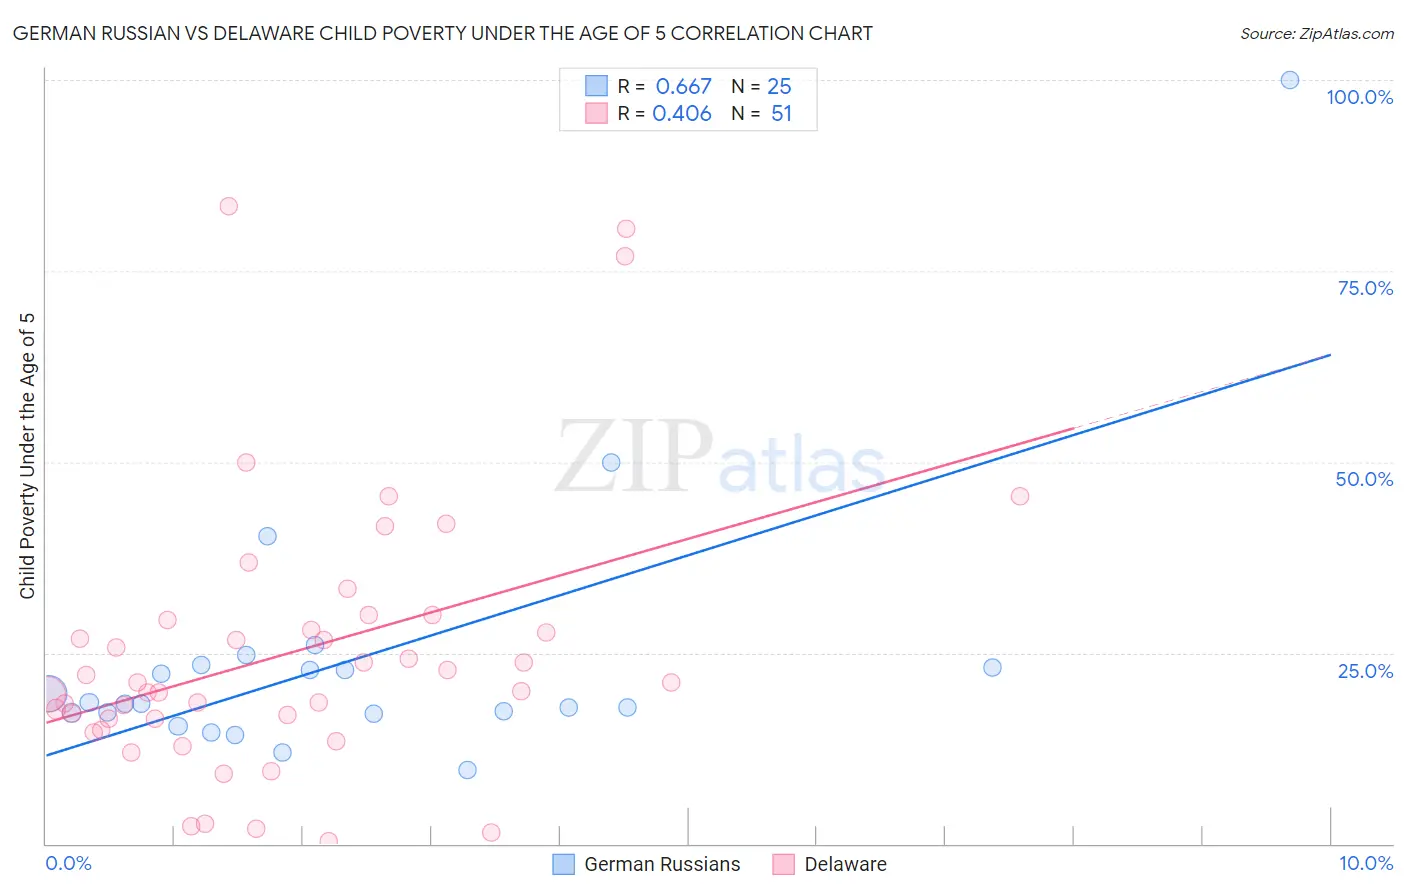 German Russian vs Delaware Child Poverty Under the Age of 5